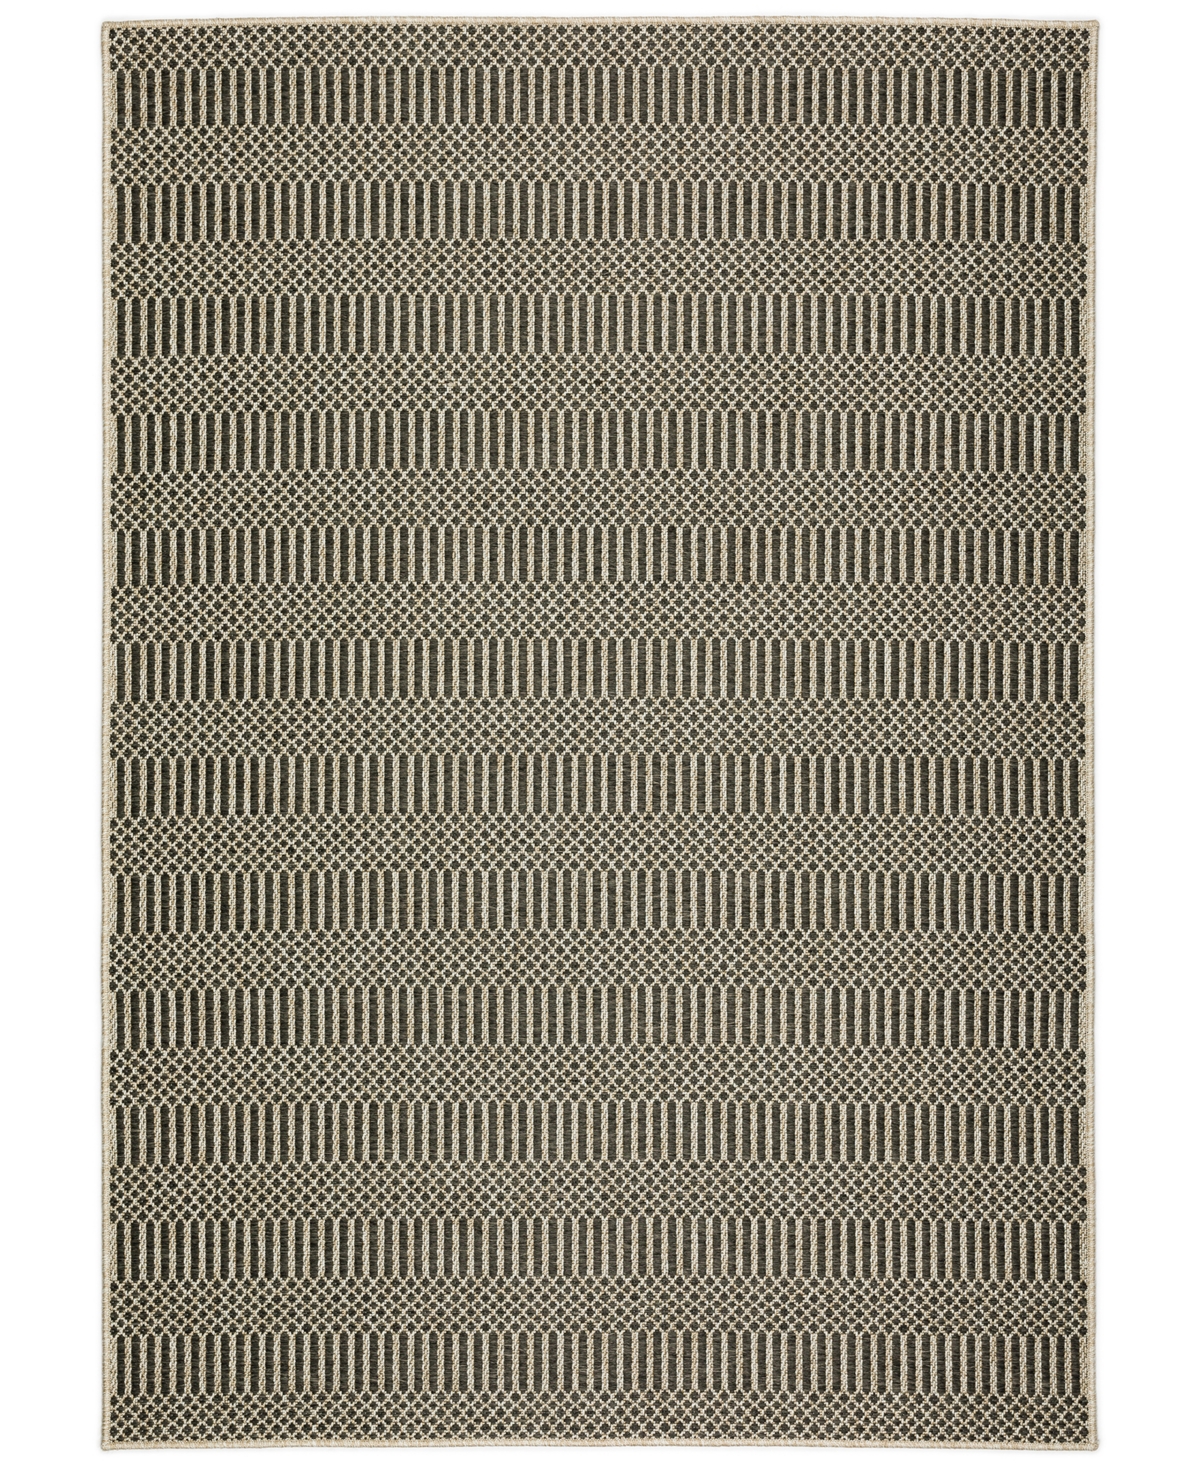 D Style Nusa Outdoor Nsa4 10' X 13' Area Rug In Charcoal